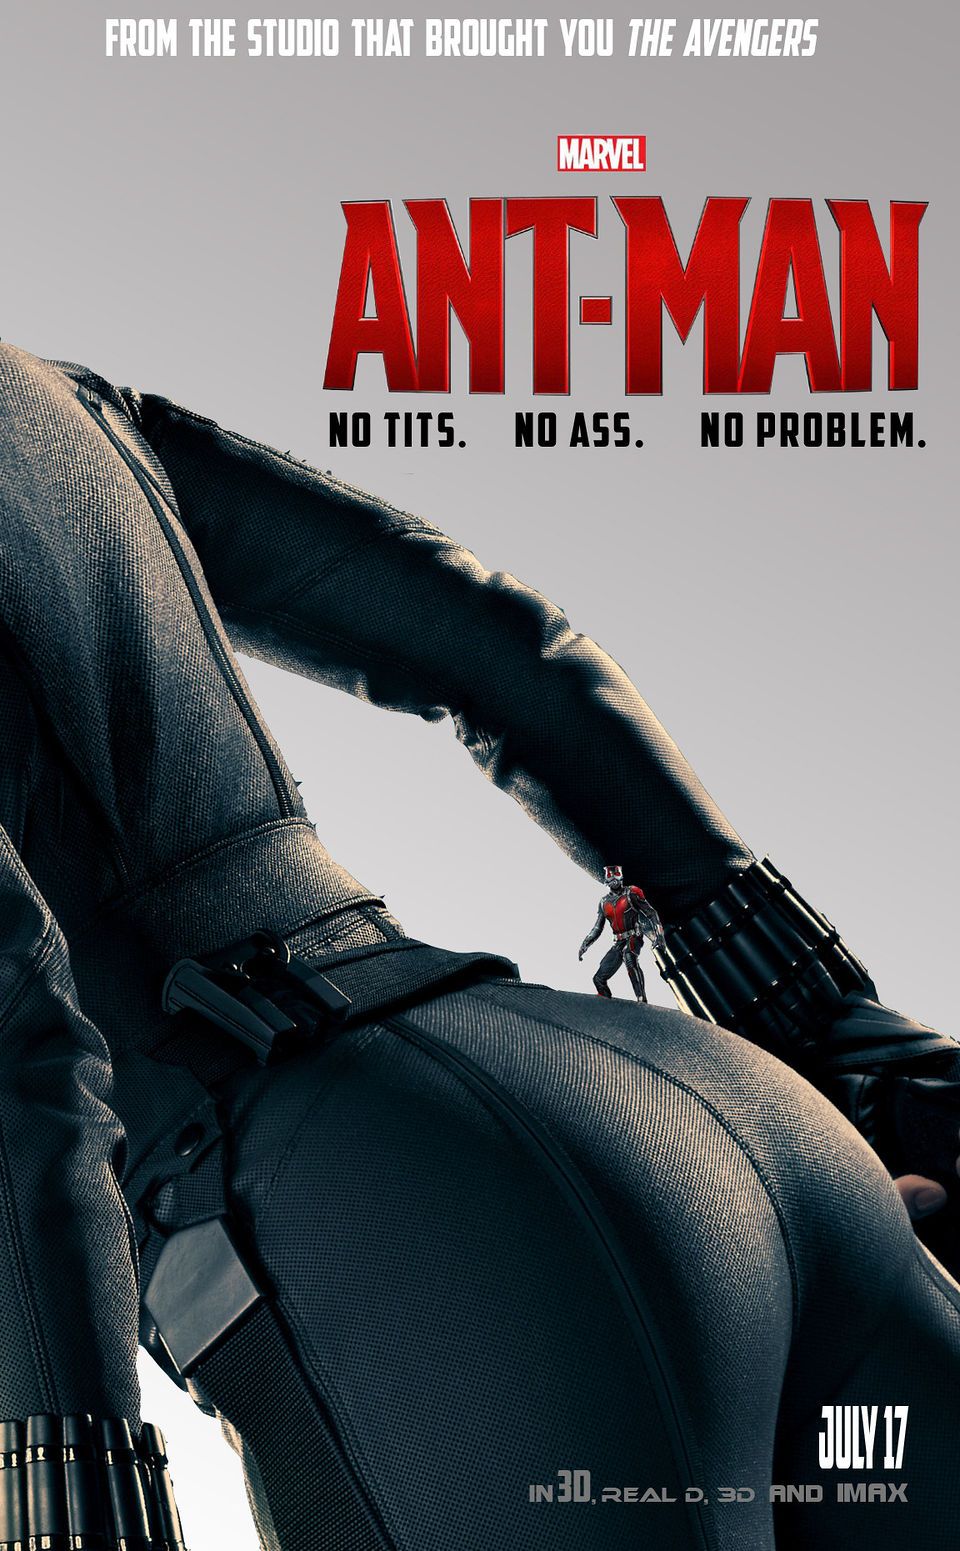 Fan Made 'Ant-Man' Posters Are Pretty Epic | Ant man poster, Black widow  marvel, Superhero movies